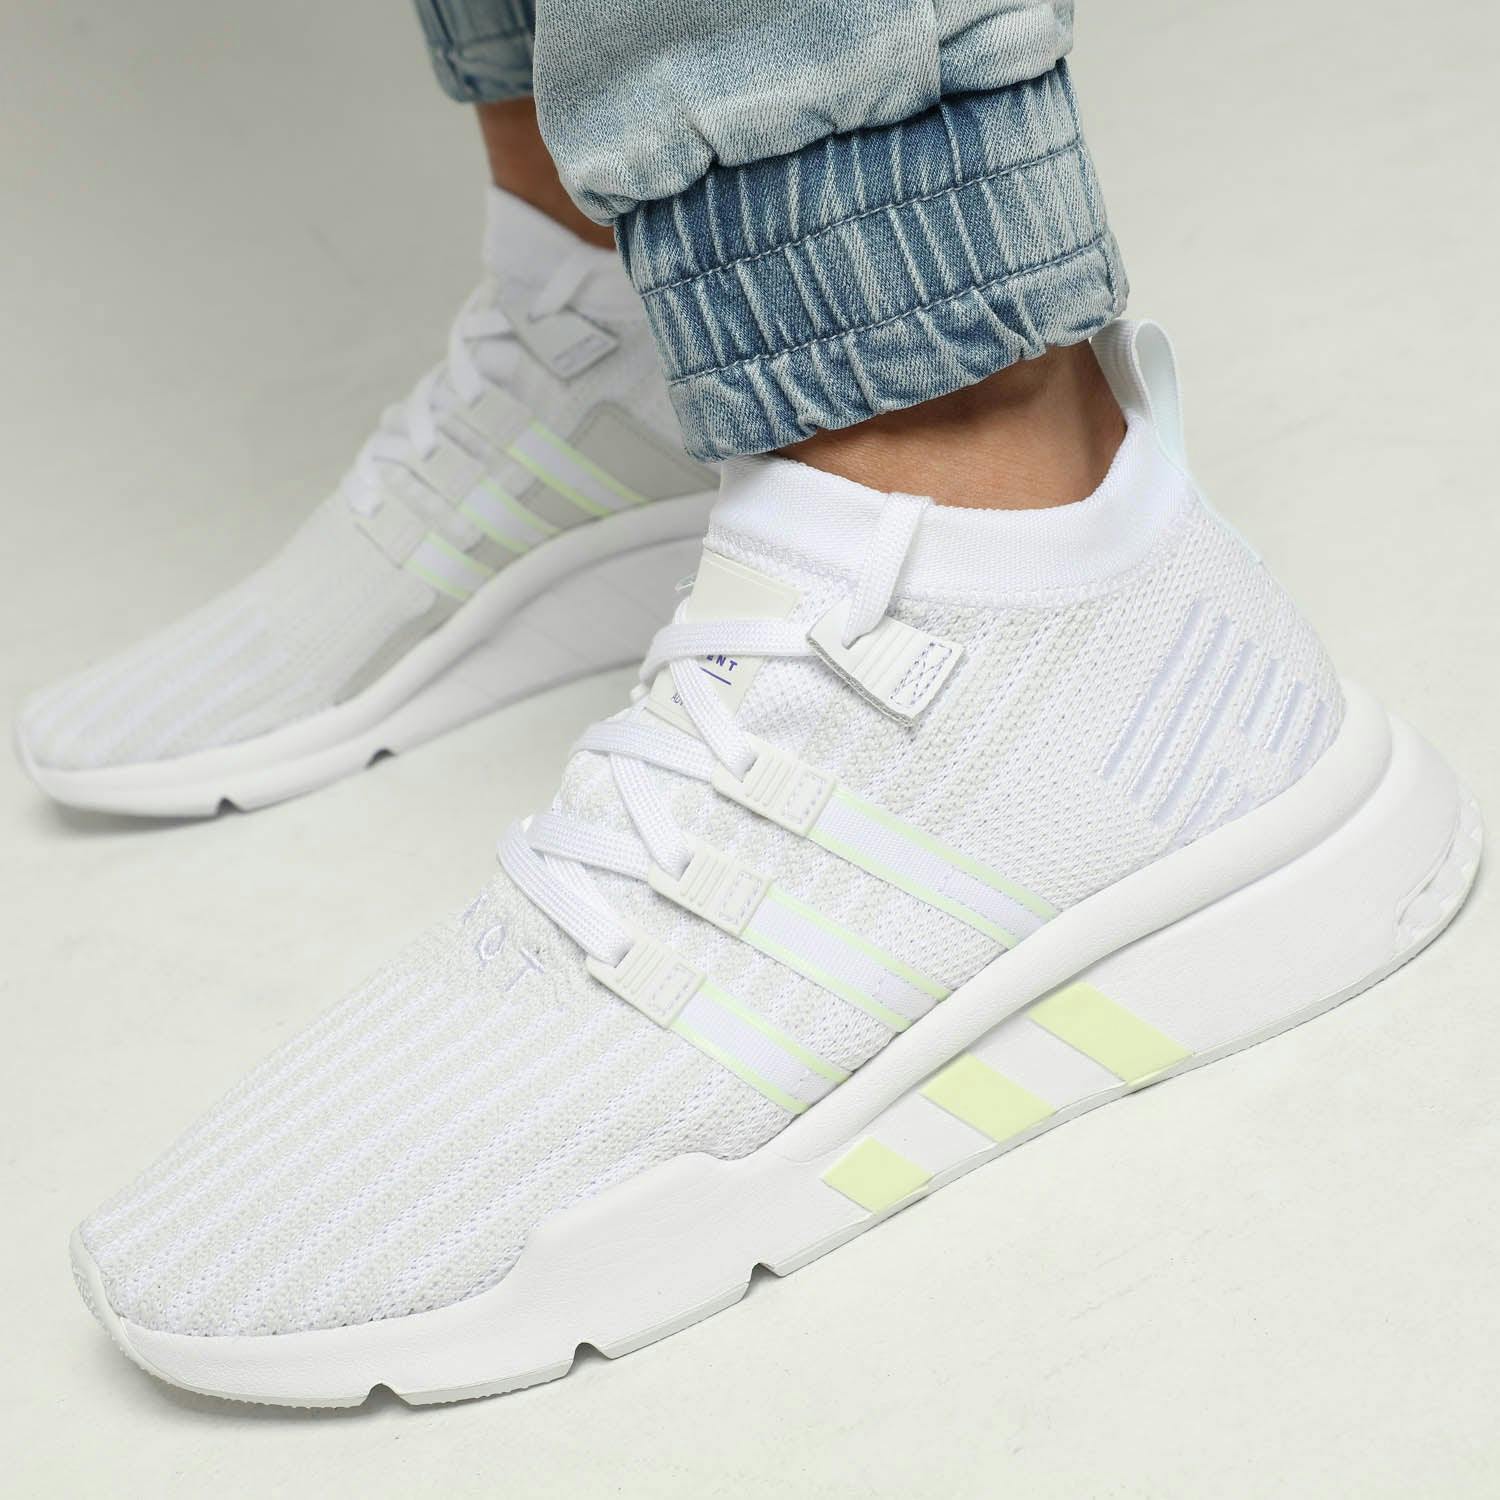 Adidas Eqt Support Mid Adv White Yellow Culture Kings Us